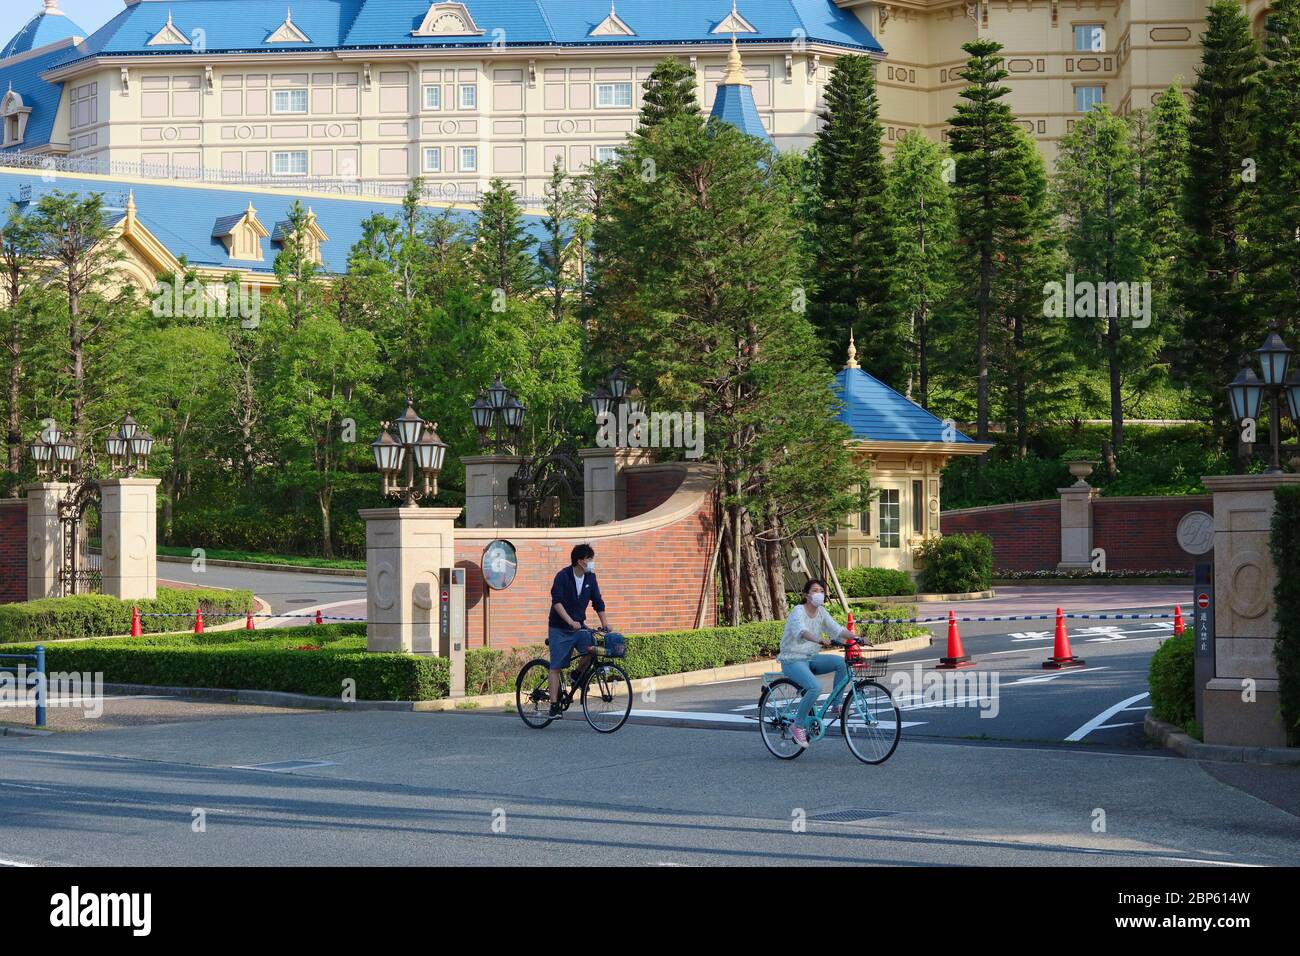 Cyclists wearing face masks pass a closed entrance to a Tokyo Disney Resort. Disneyland is closed and the area unusually quiet due to the coronavirus. Stock Photo